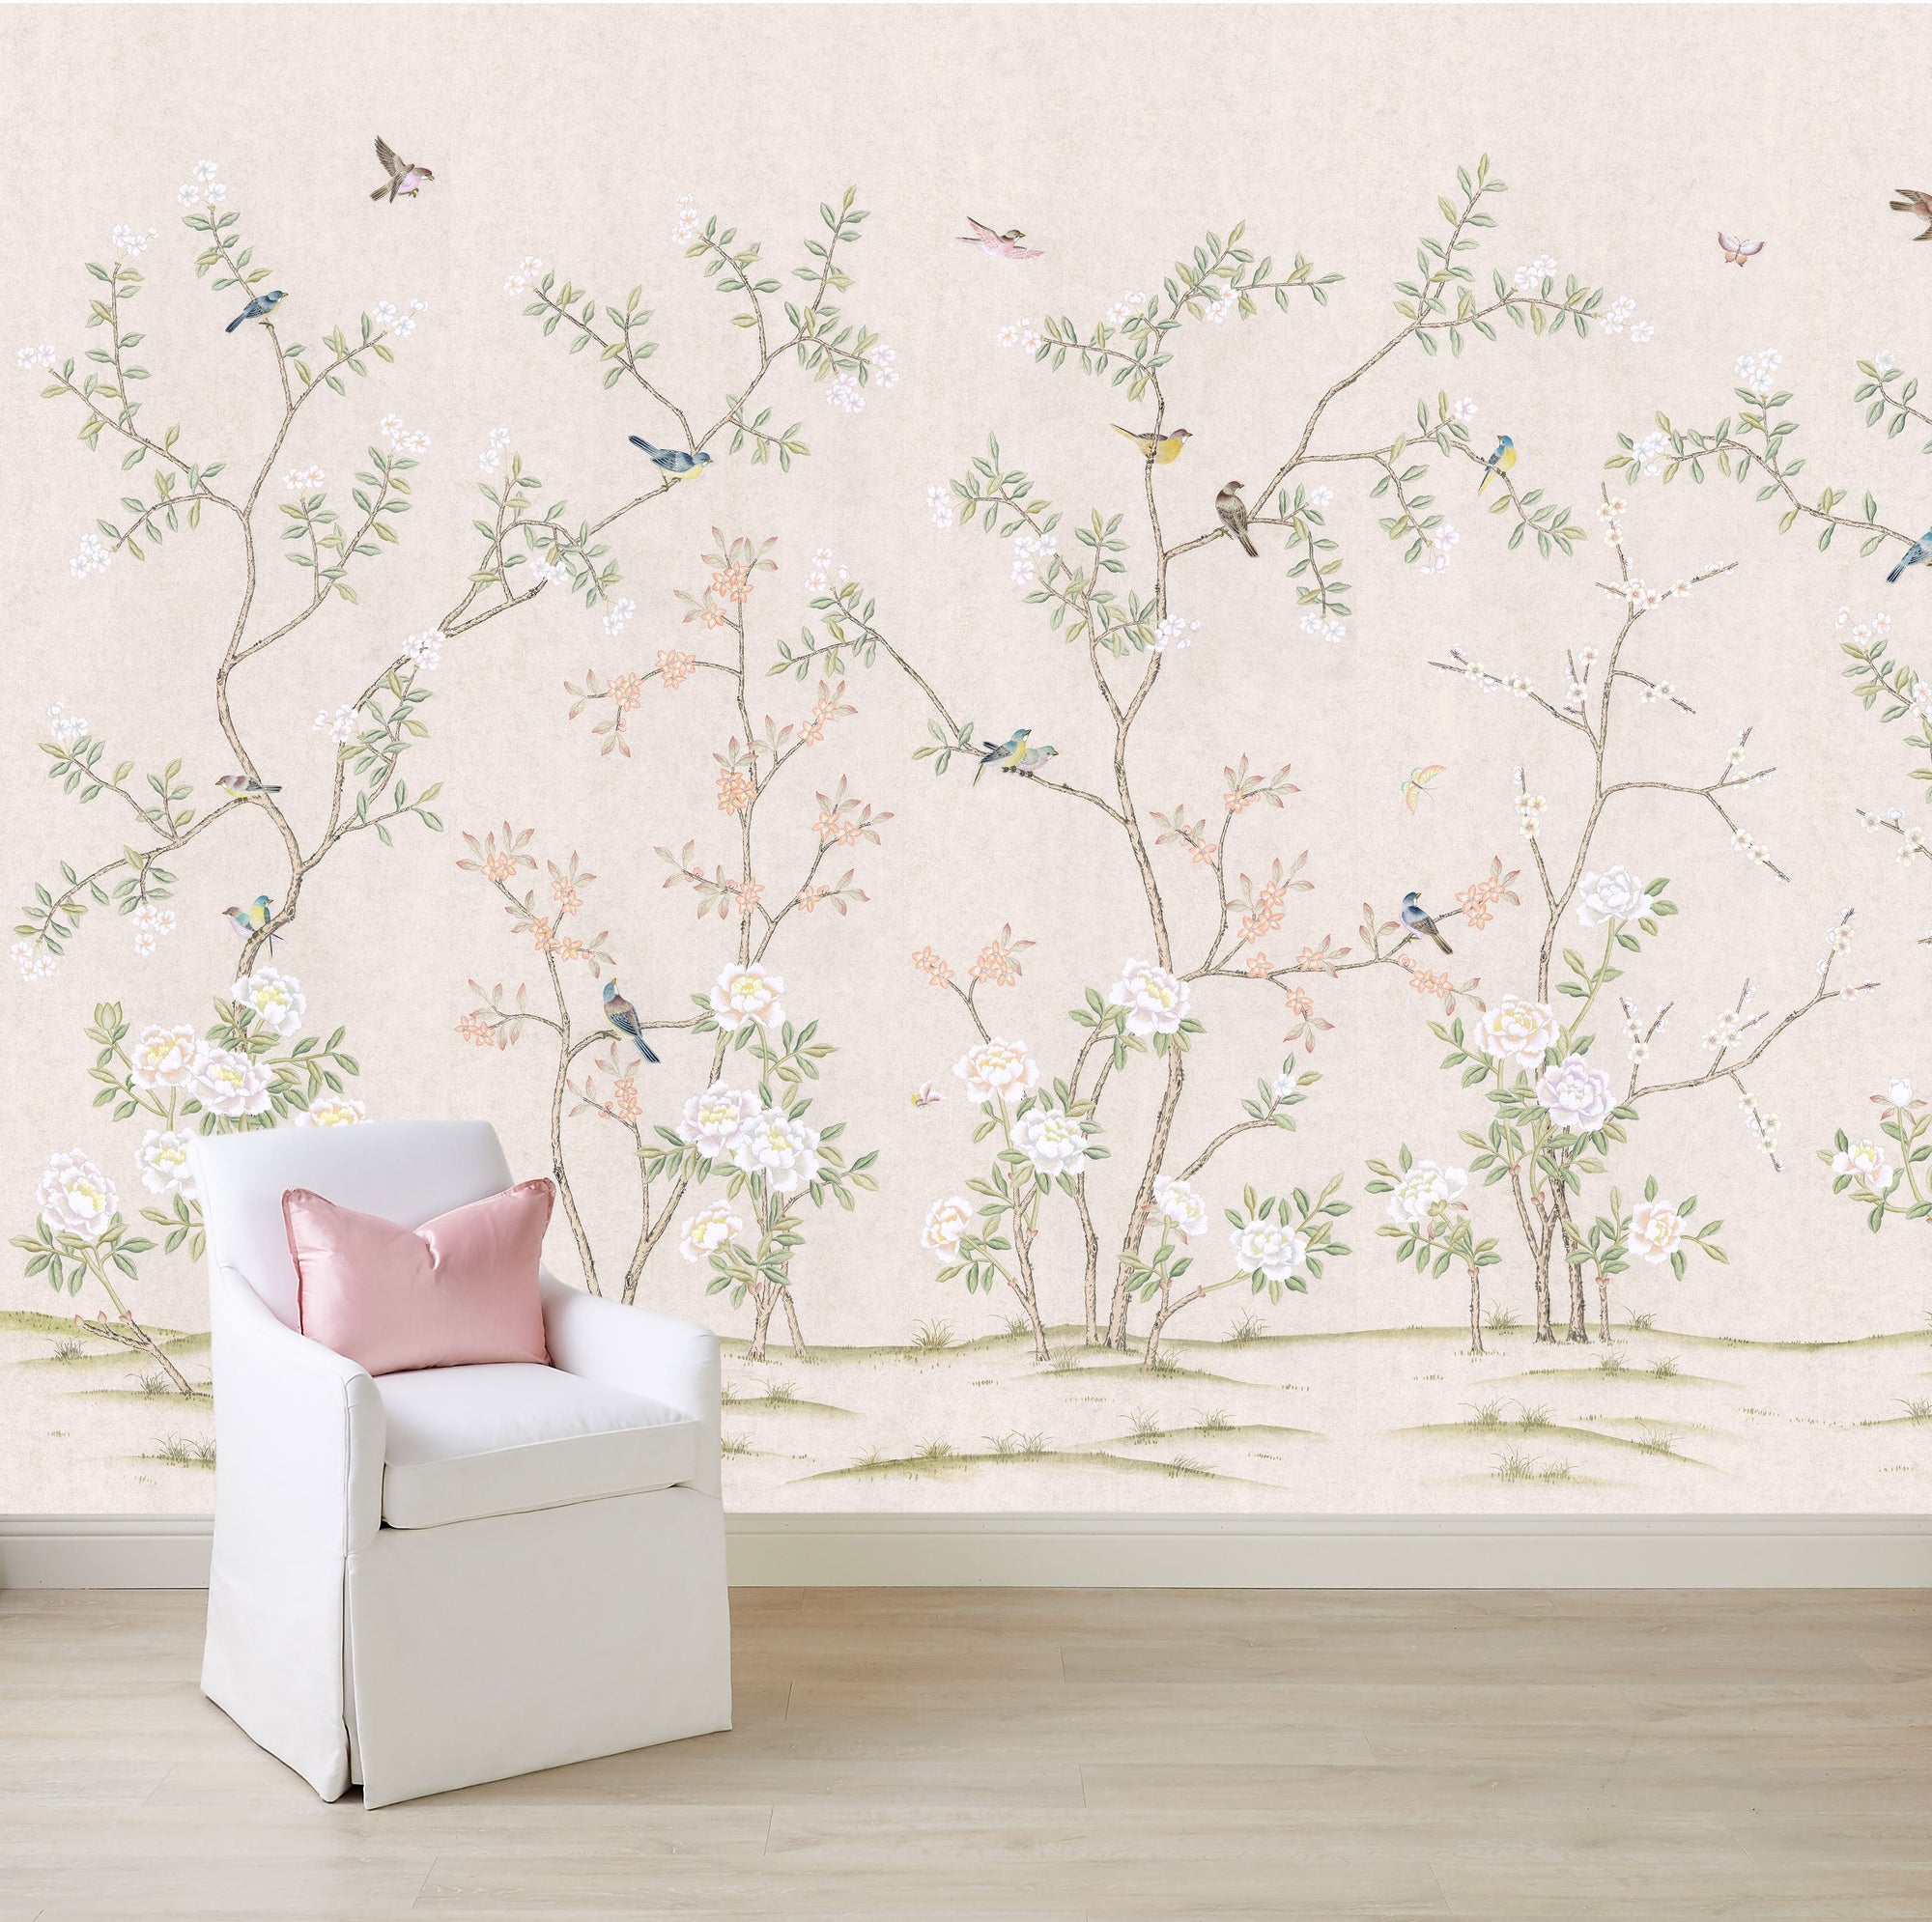 Abingdon Chinoiserie Floral Mural Wallpaper in Blush on Wall